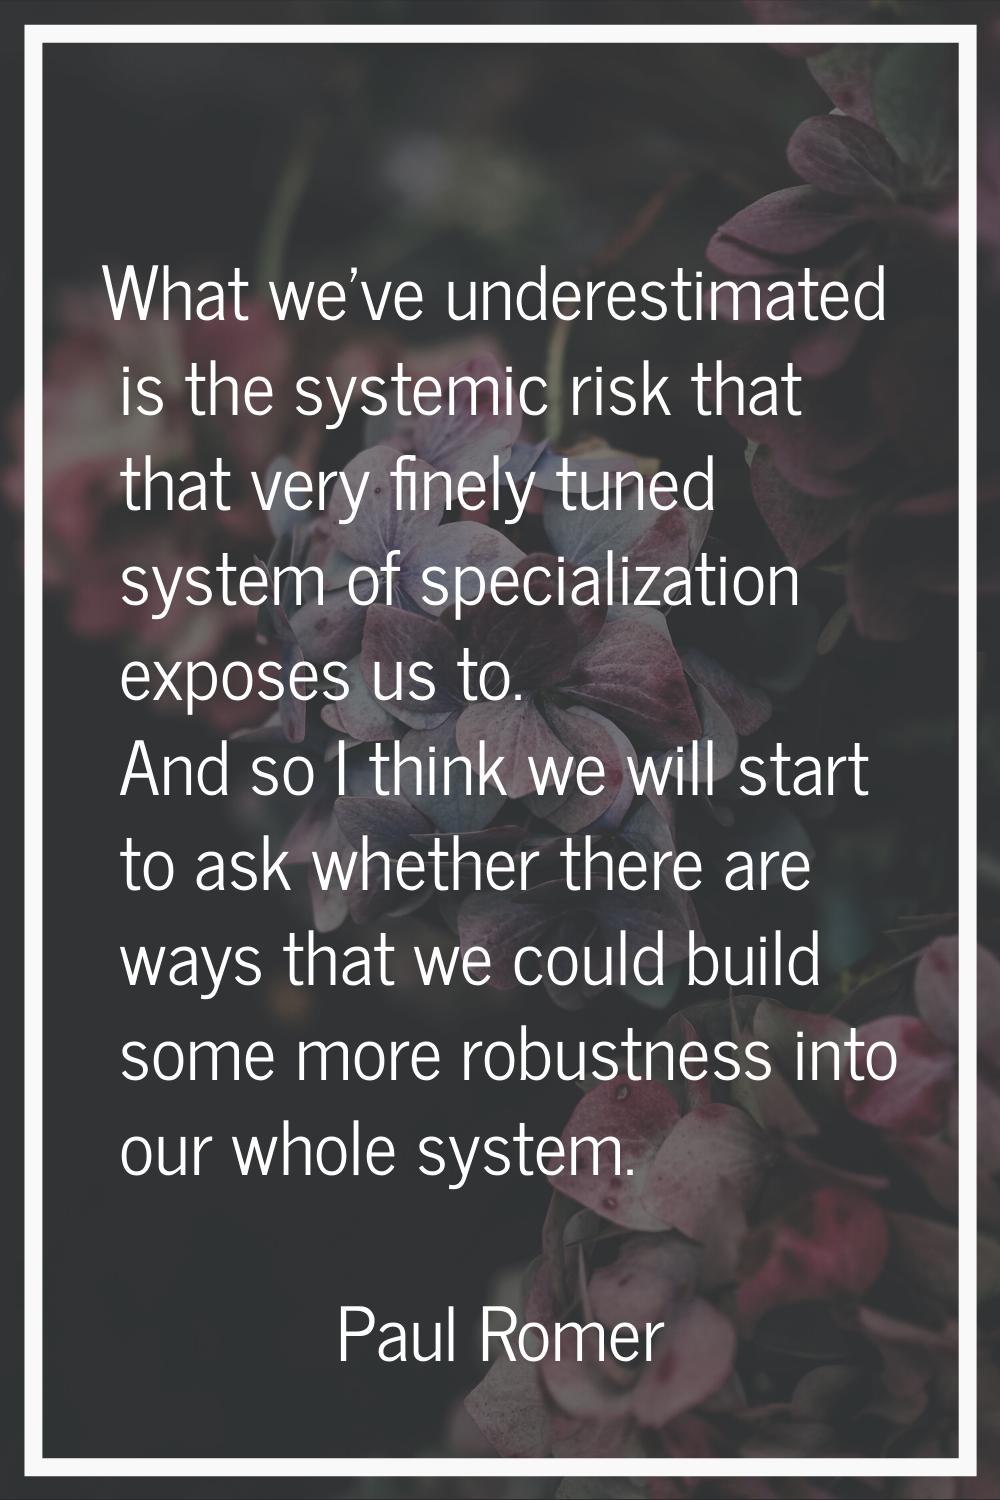 What we've underestimated is the systemic risk that that very finely tuned system of specialization